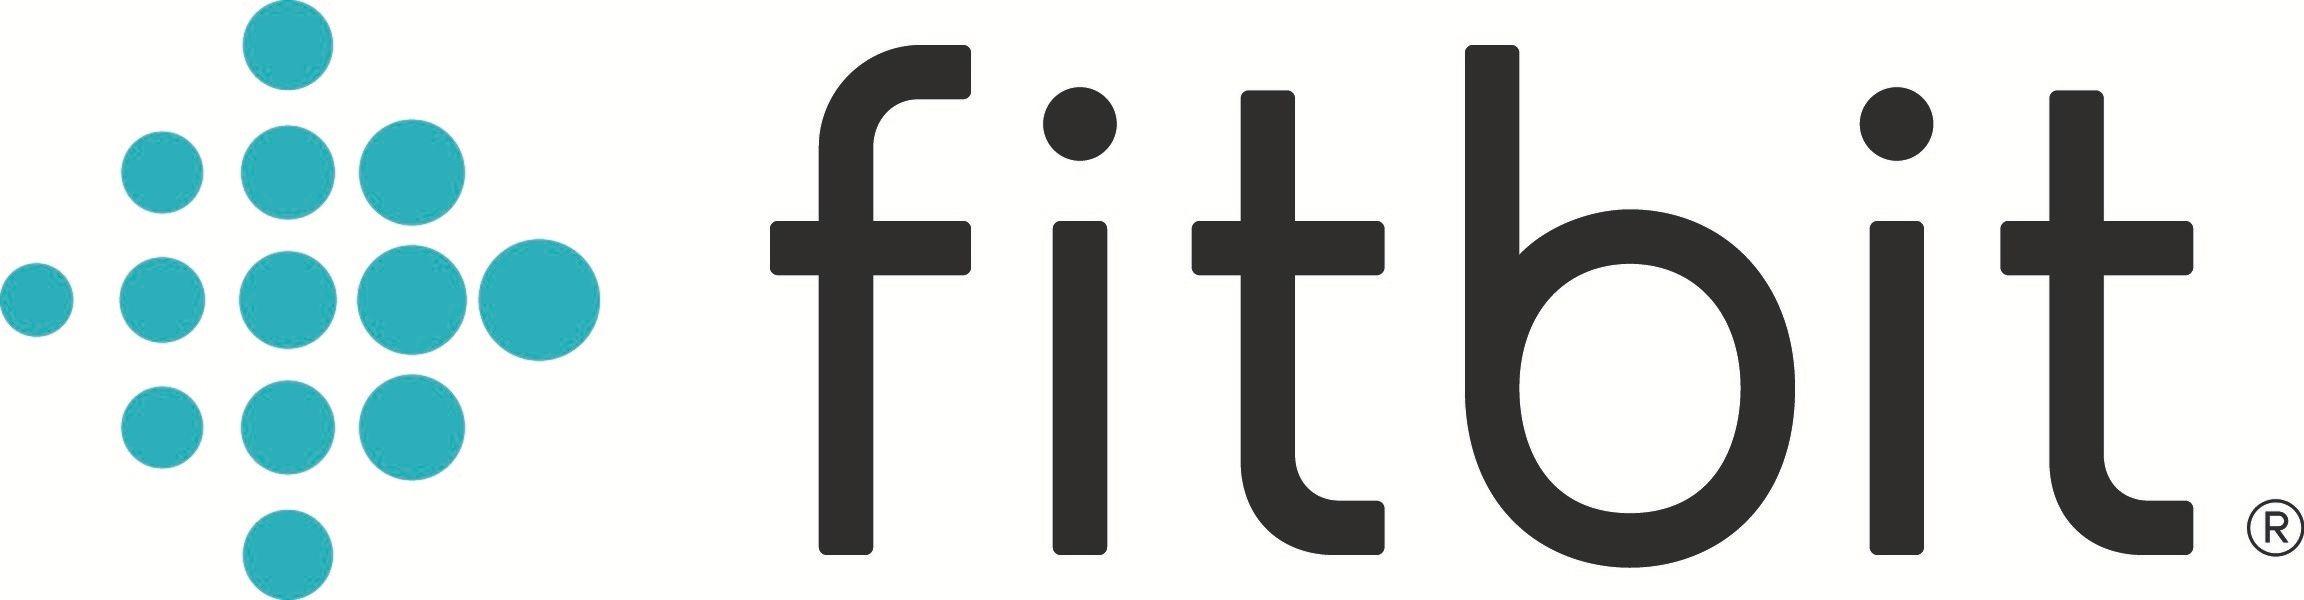 Fitbit Versa Logo - Fitbit Introduces Fitbit Versa, the Smartwatch for All | Business Wire